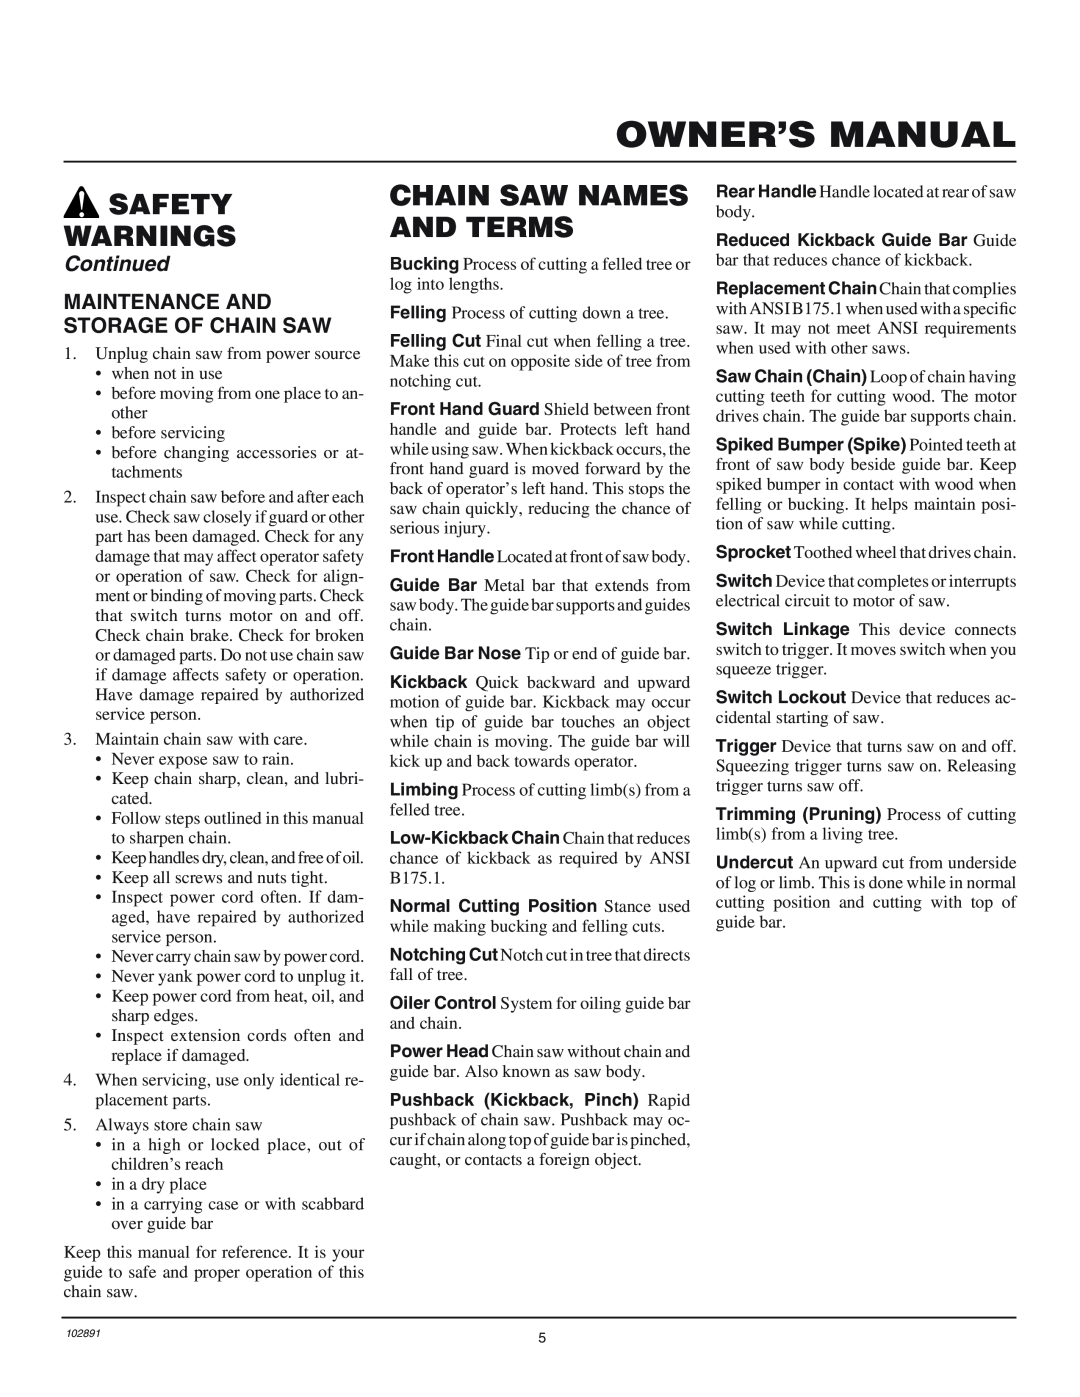 Desa 100271-01 Chain Saw Names And Terms, Maintenance And Storage Of Chain Saw, Reduced Kickback Guide Bar Guide 